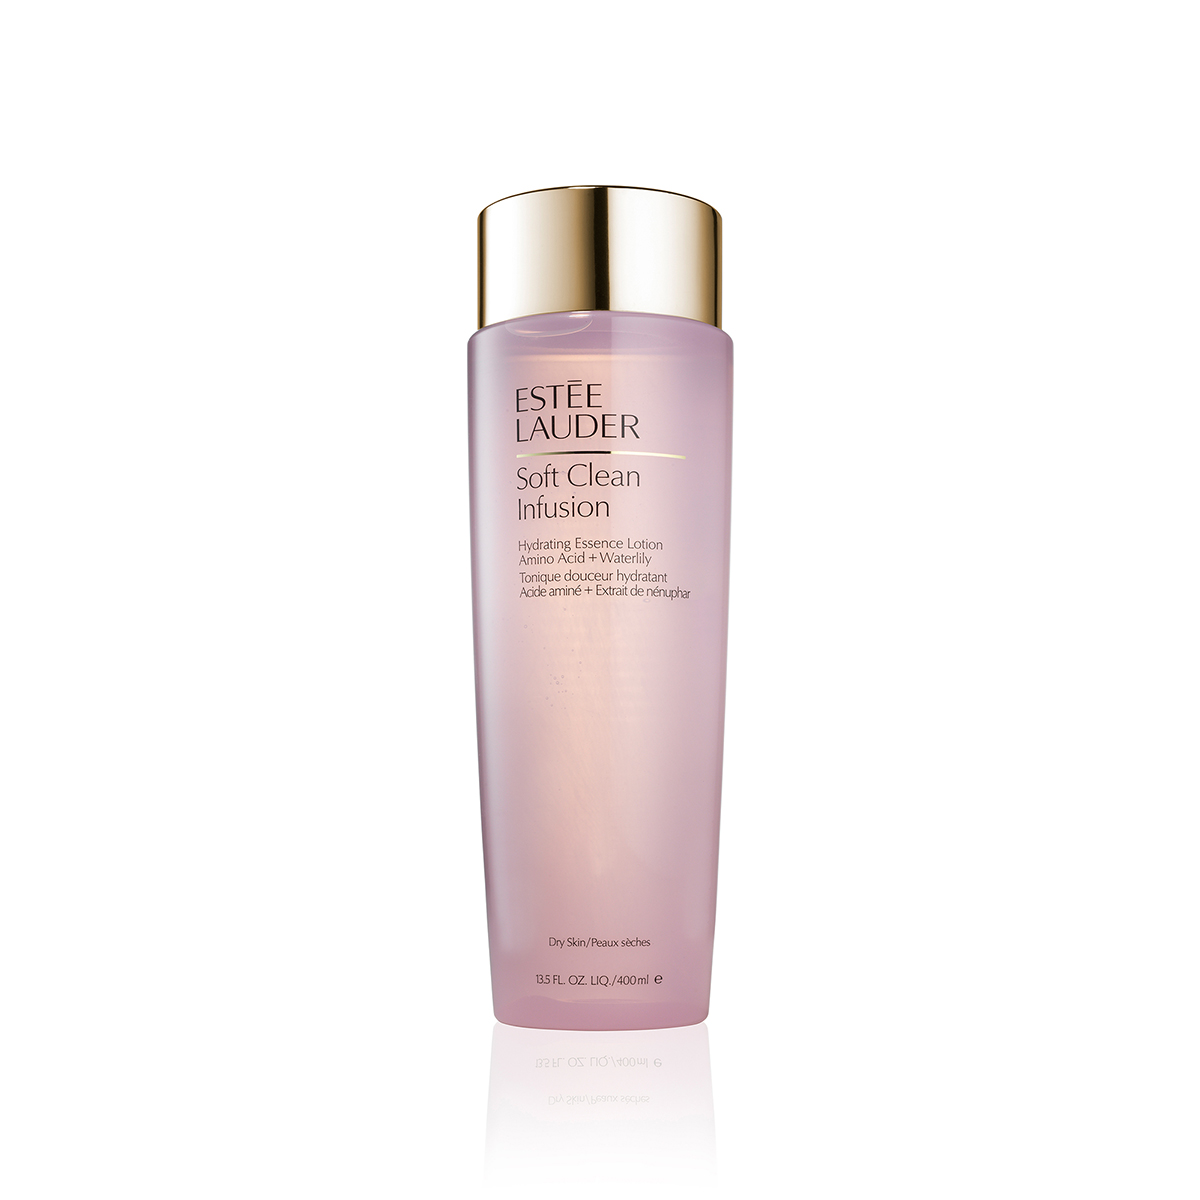 Open Video Modal for Estee Lauder(tm) Soft Clean Infusion Hydrating Treatment Lotion